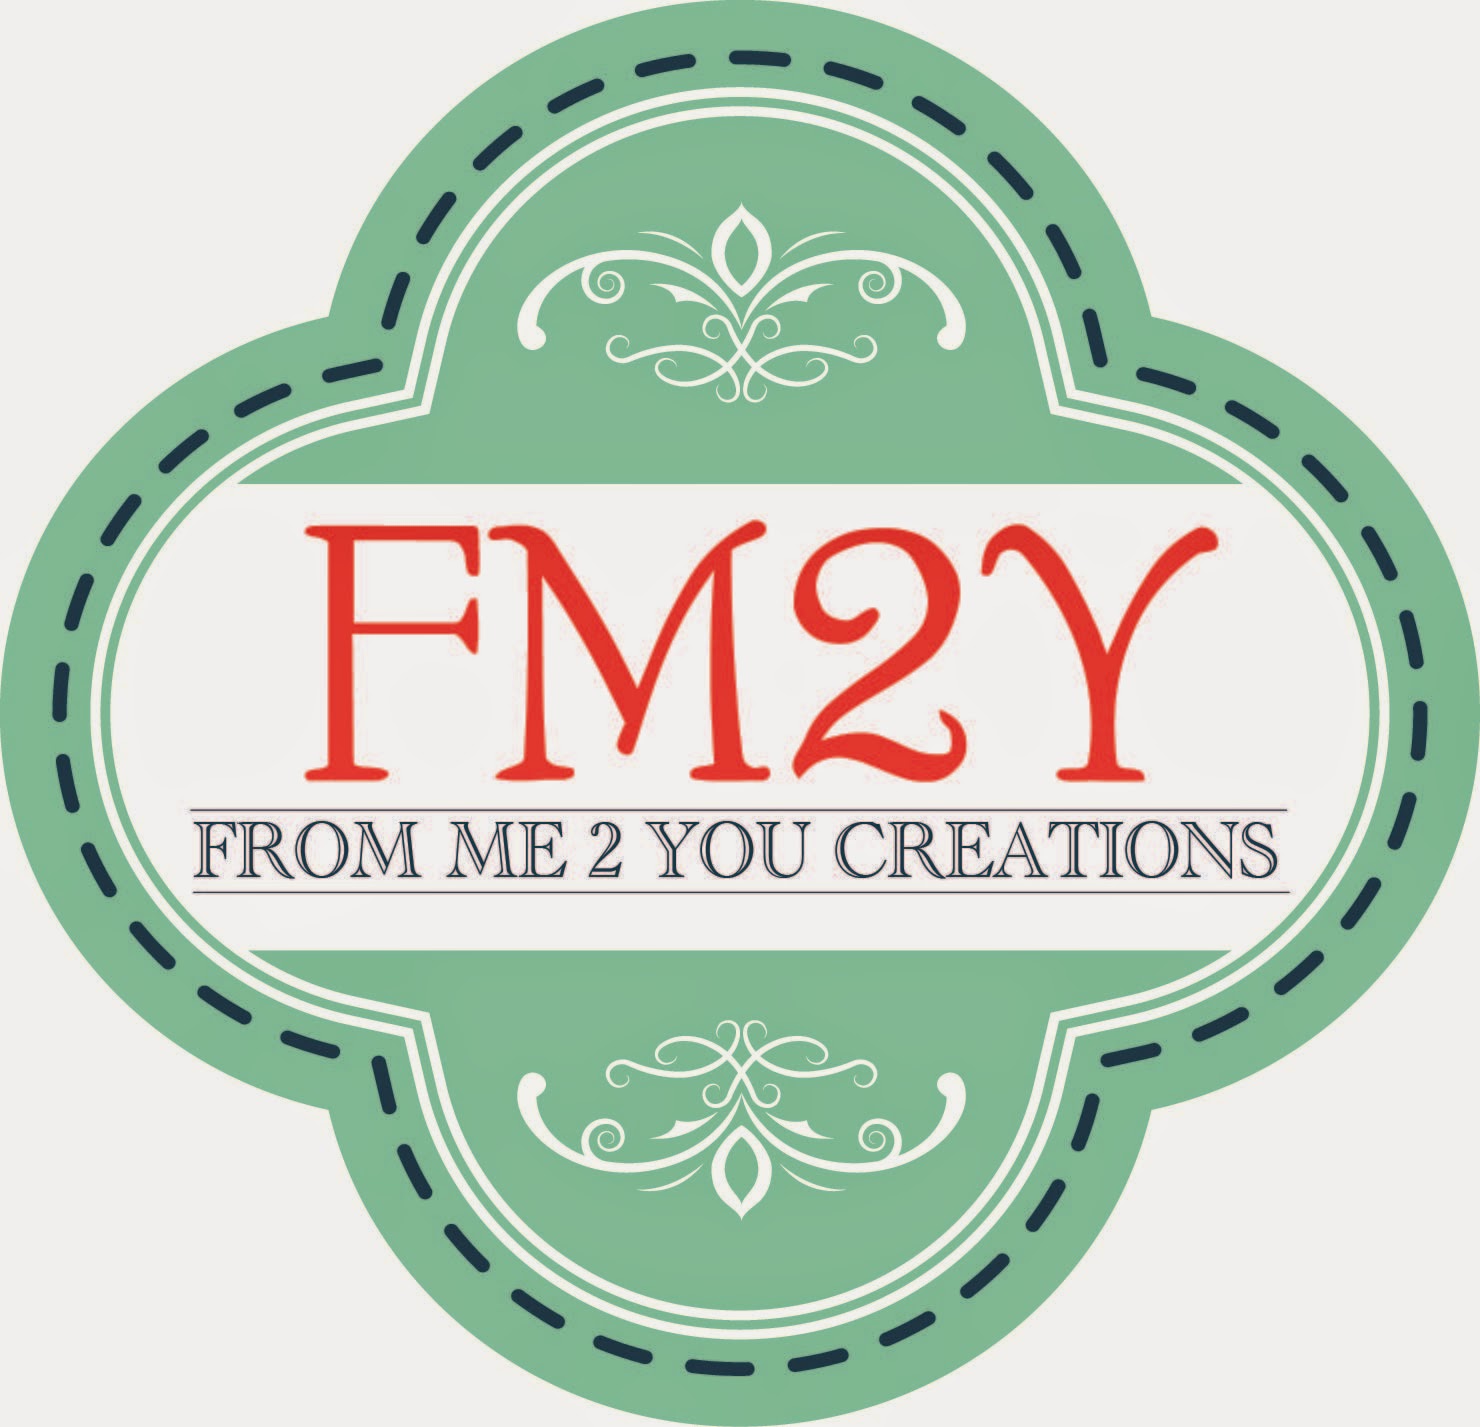 #FM2YCreations #Letspartycreations